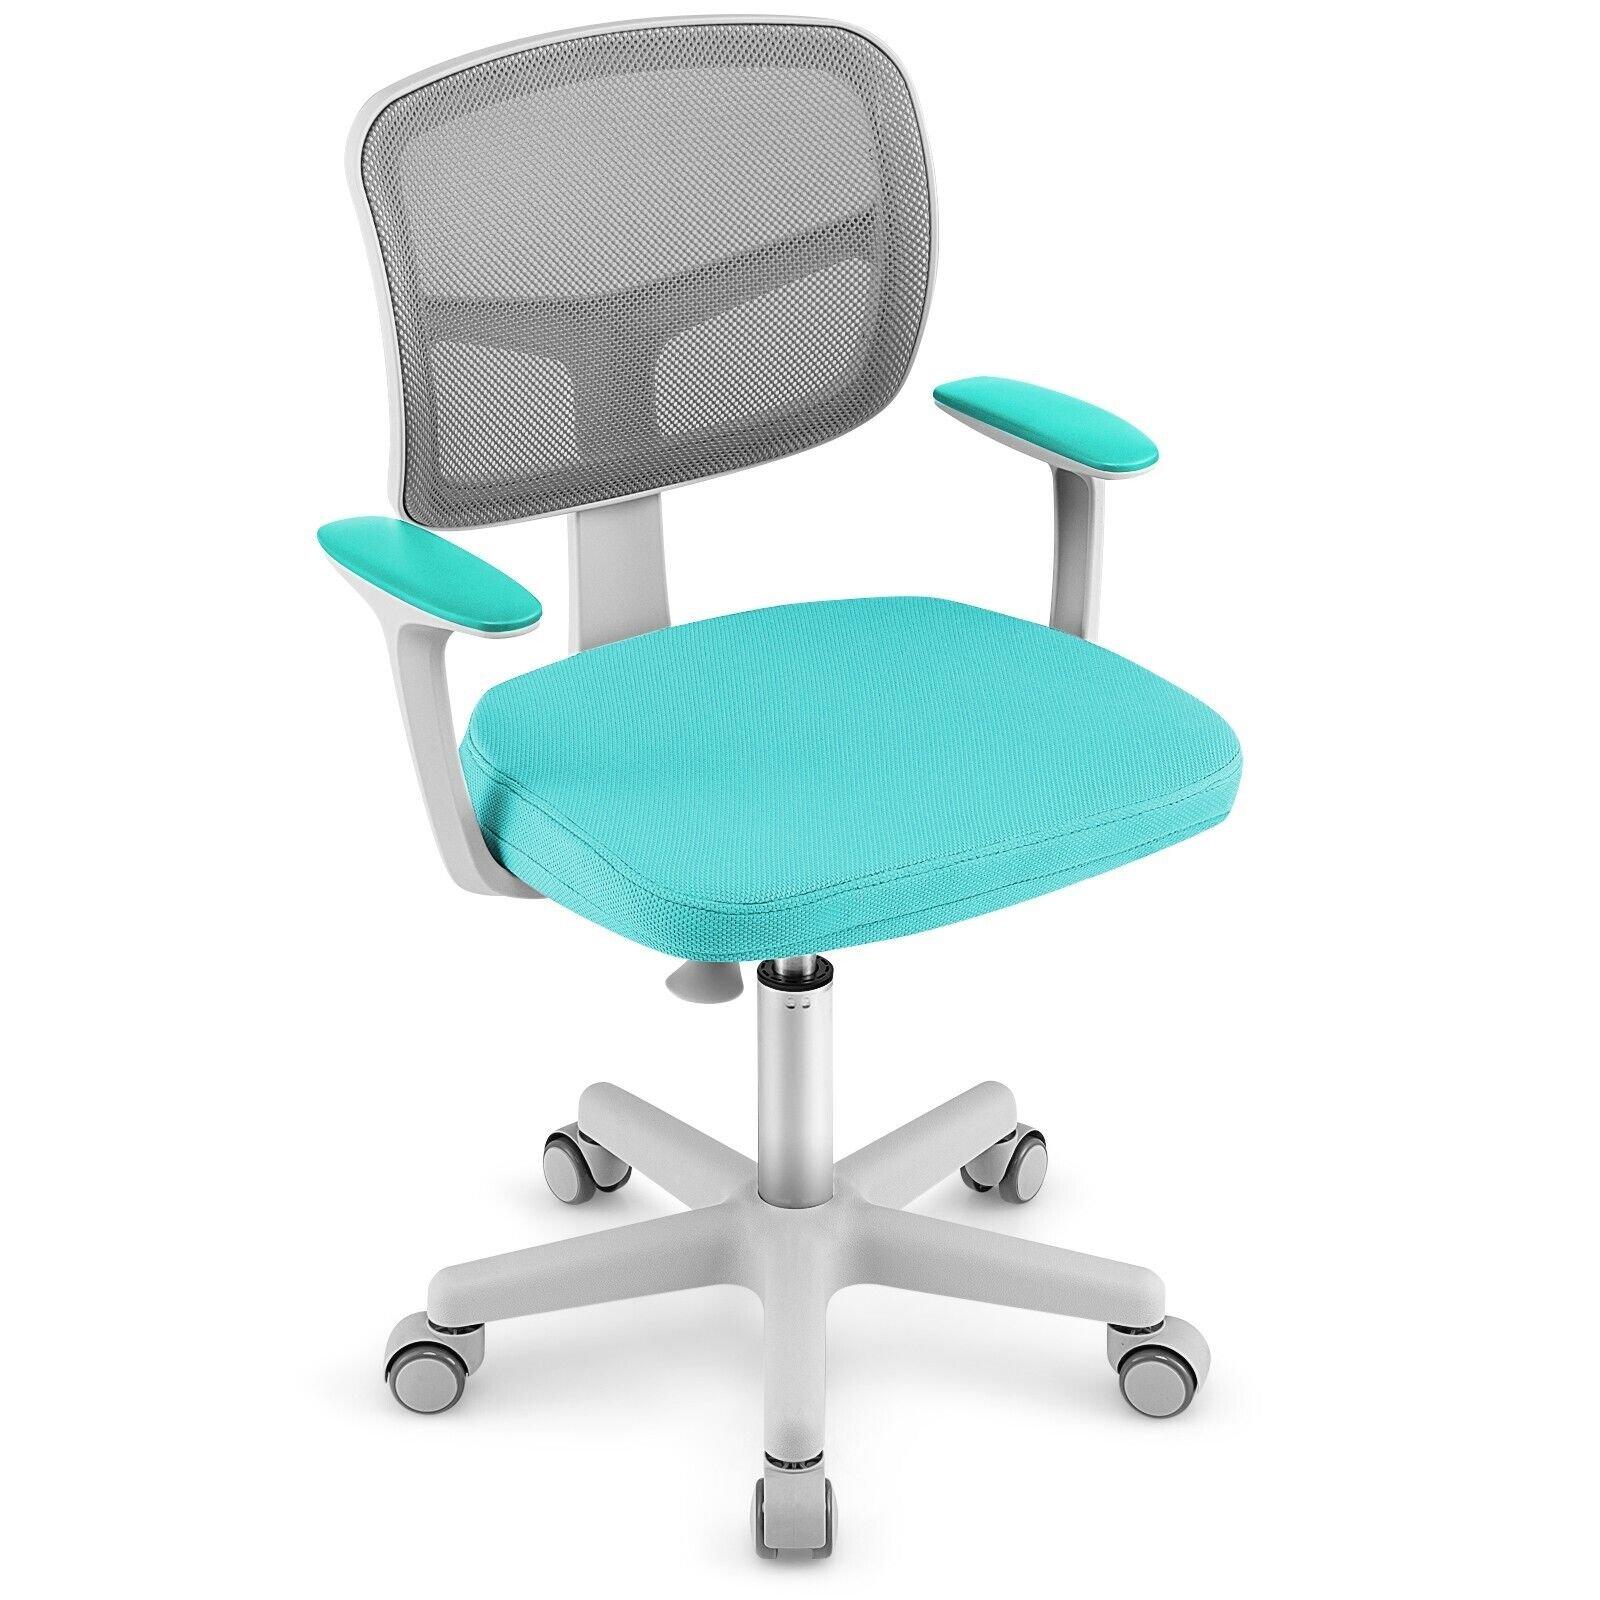 Kids Computer Desk Chair Low-Back Task Study Chairs Children Office Task Chair